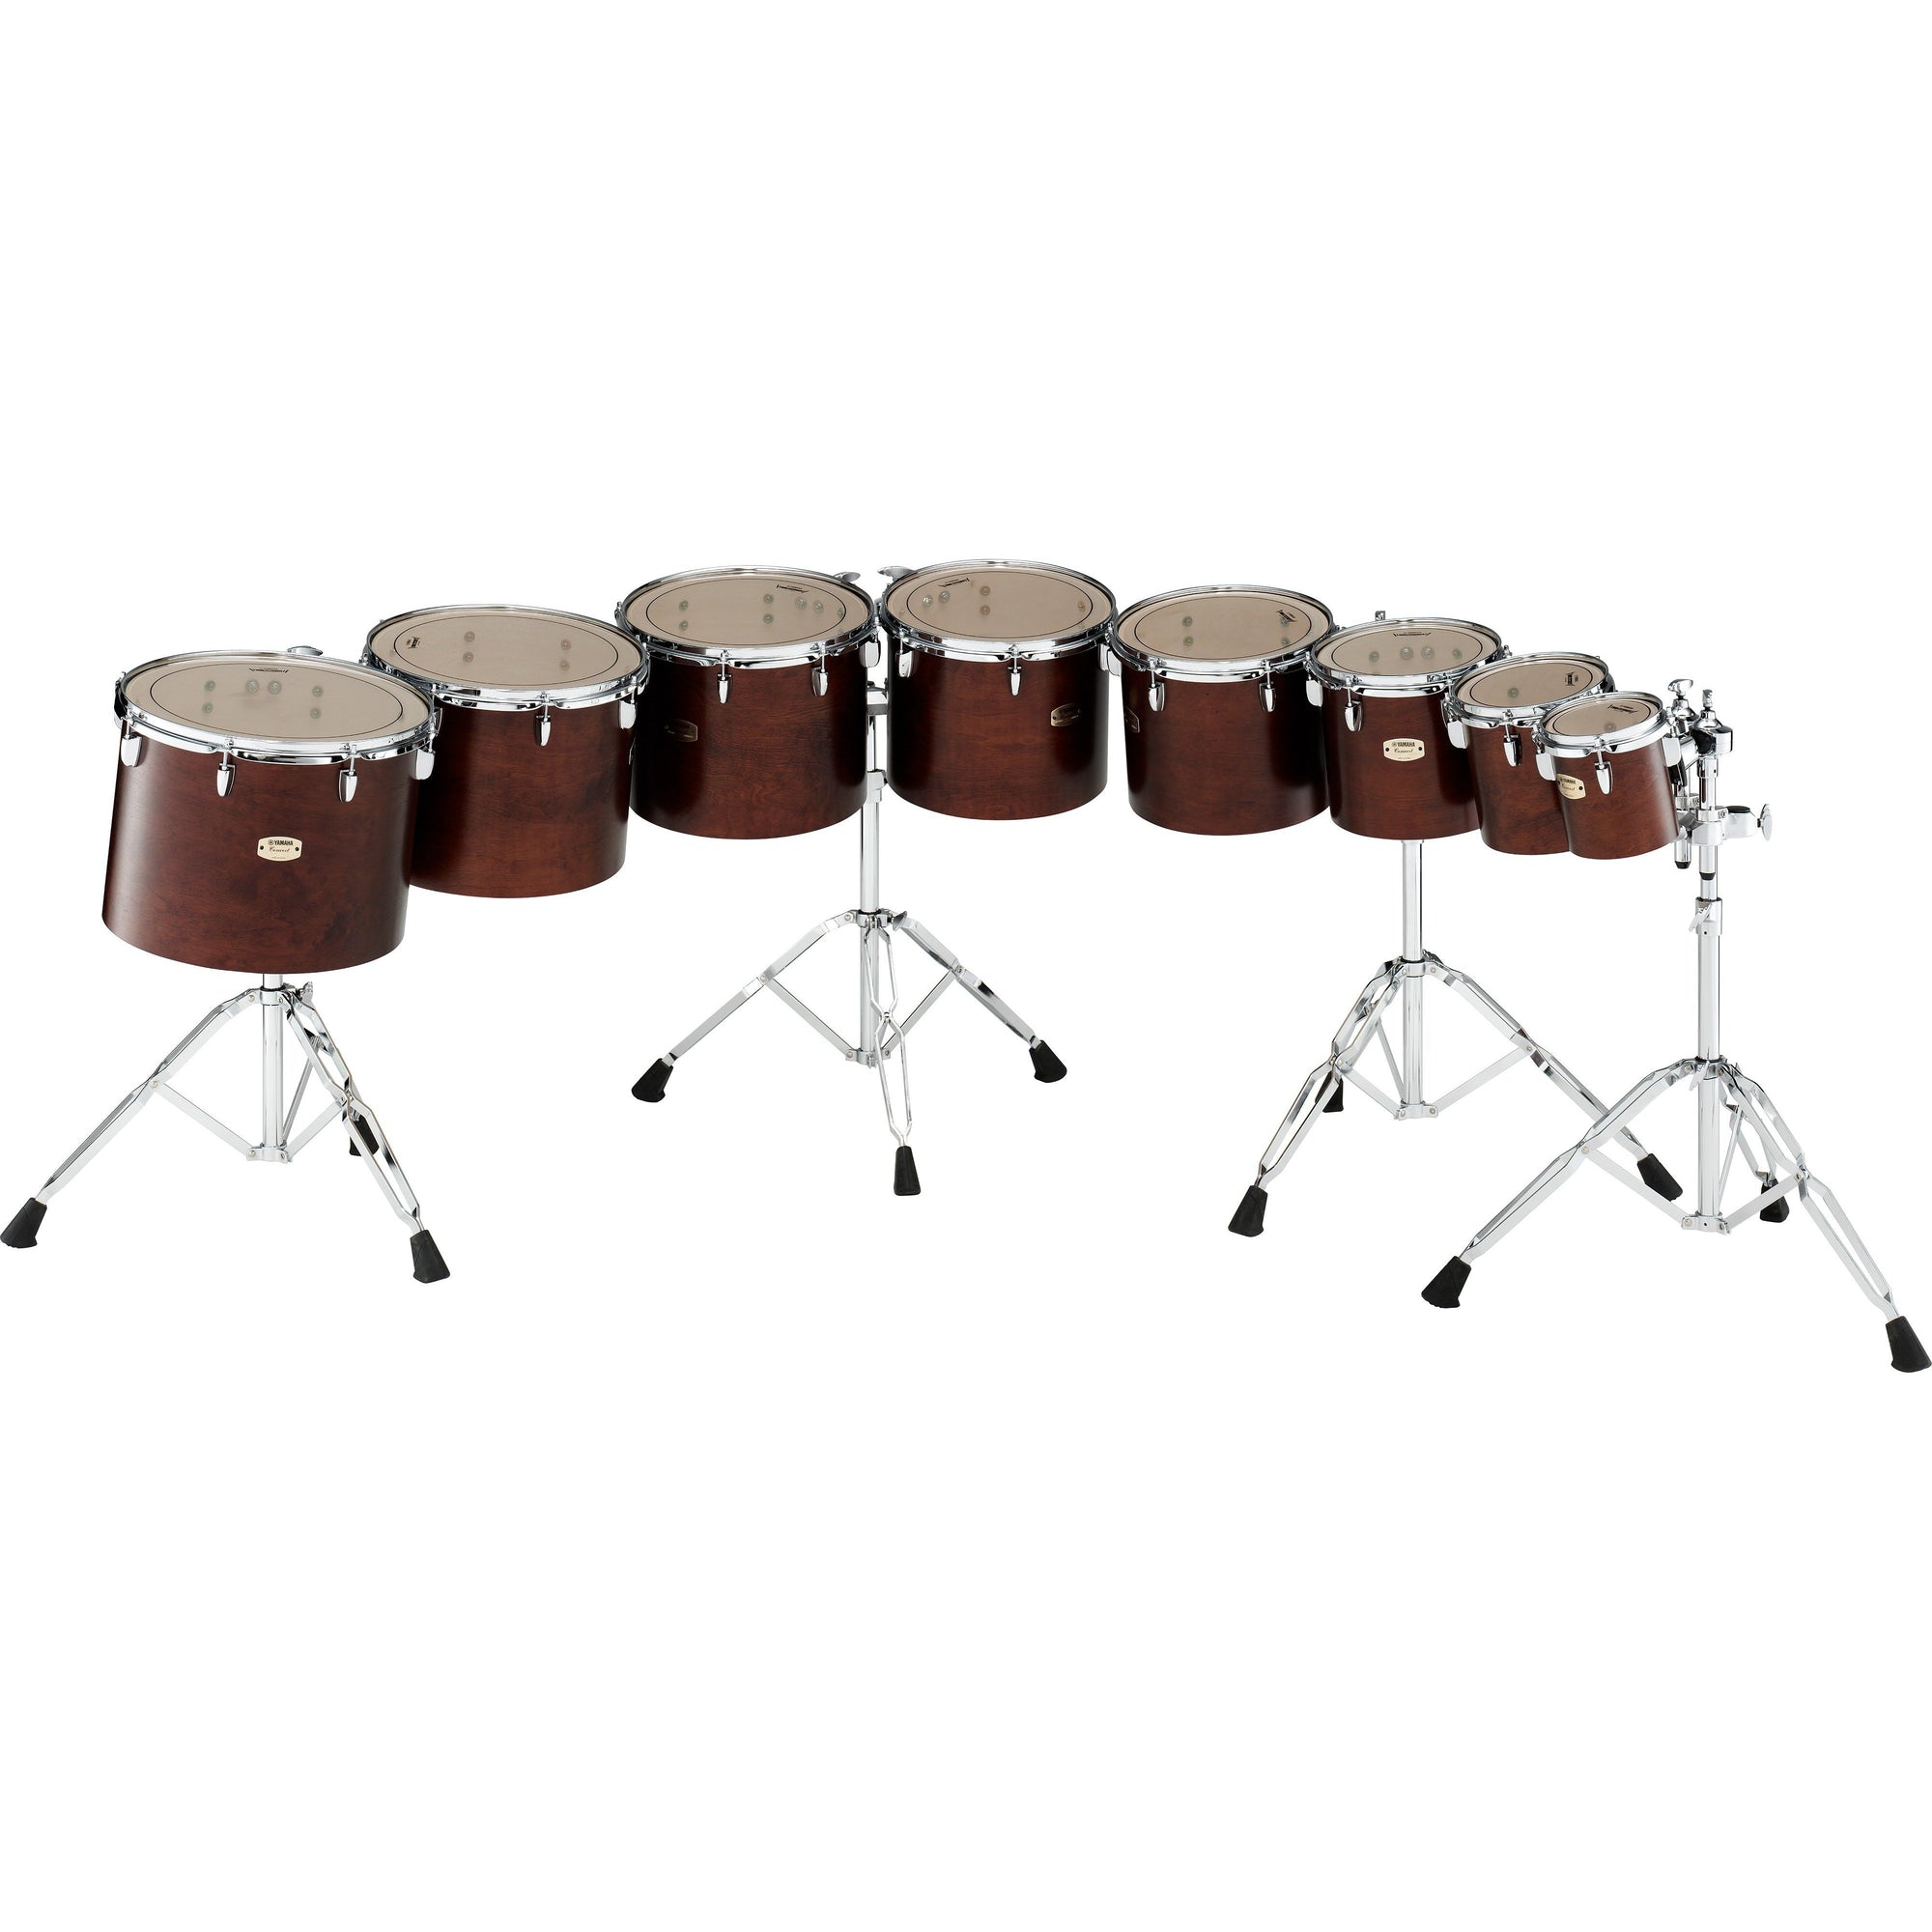 Yamaha - CT-8000 Series - Single-Headed Tom Toms with Birch Ply Shell-Percussion-Yamaha-Music Elements